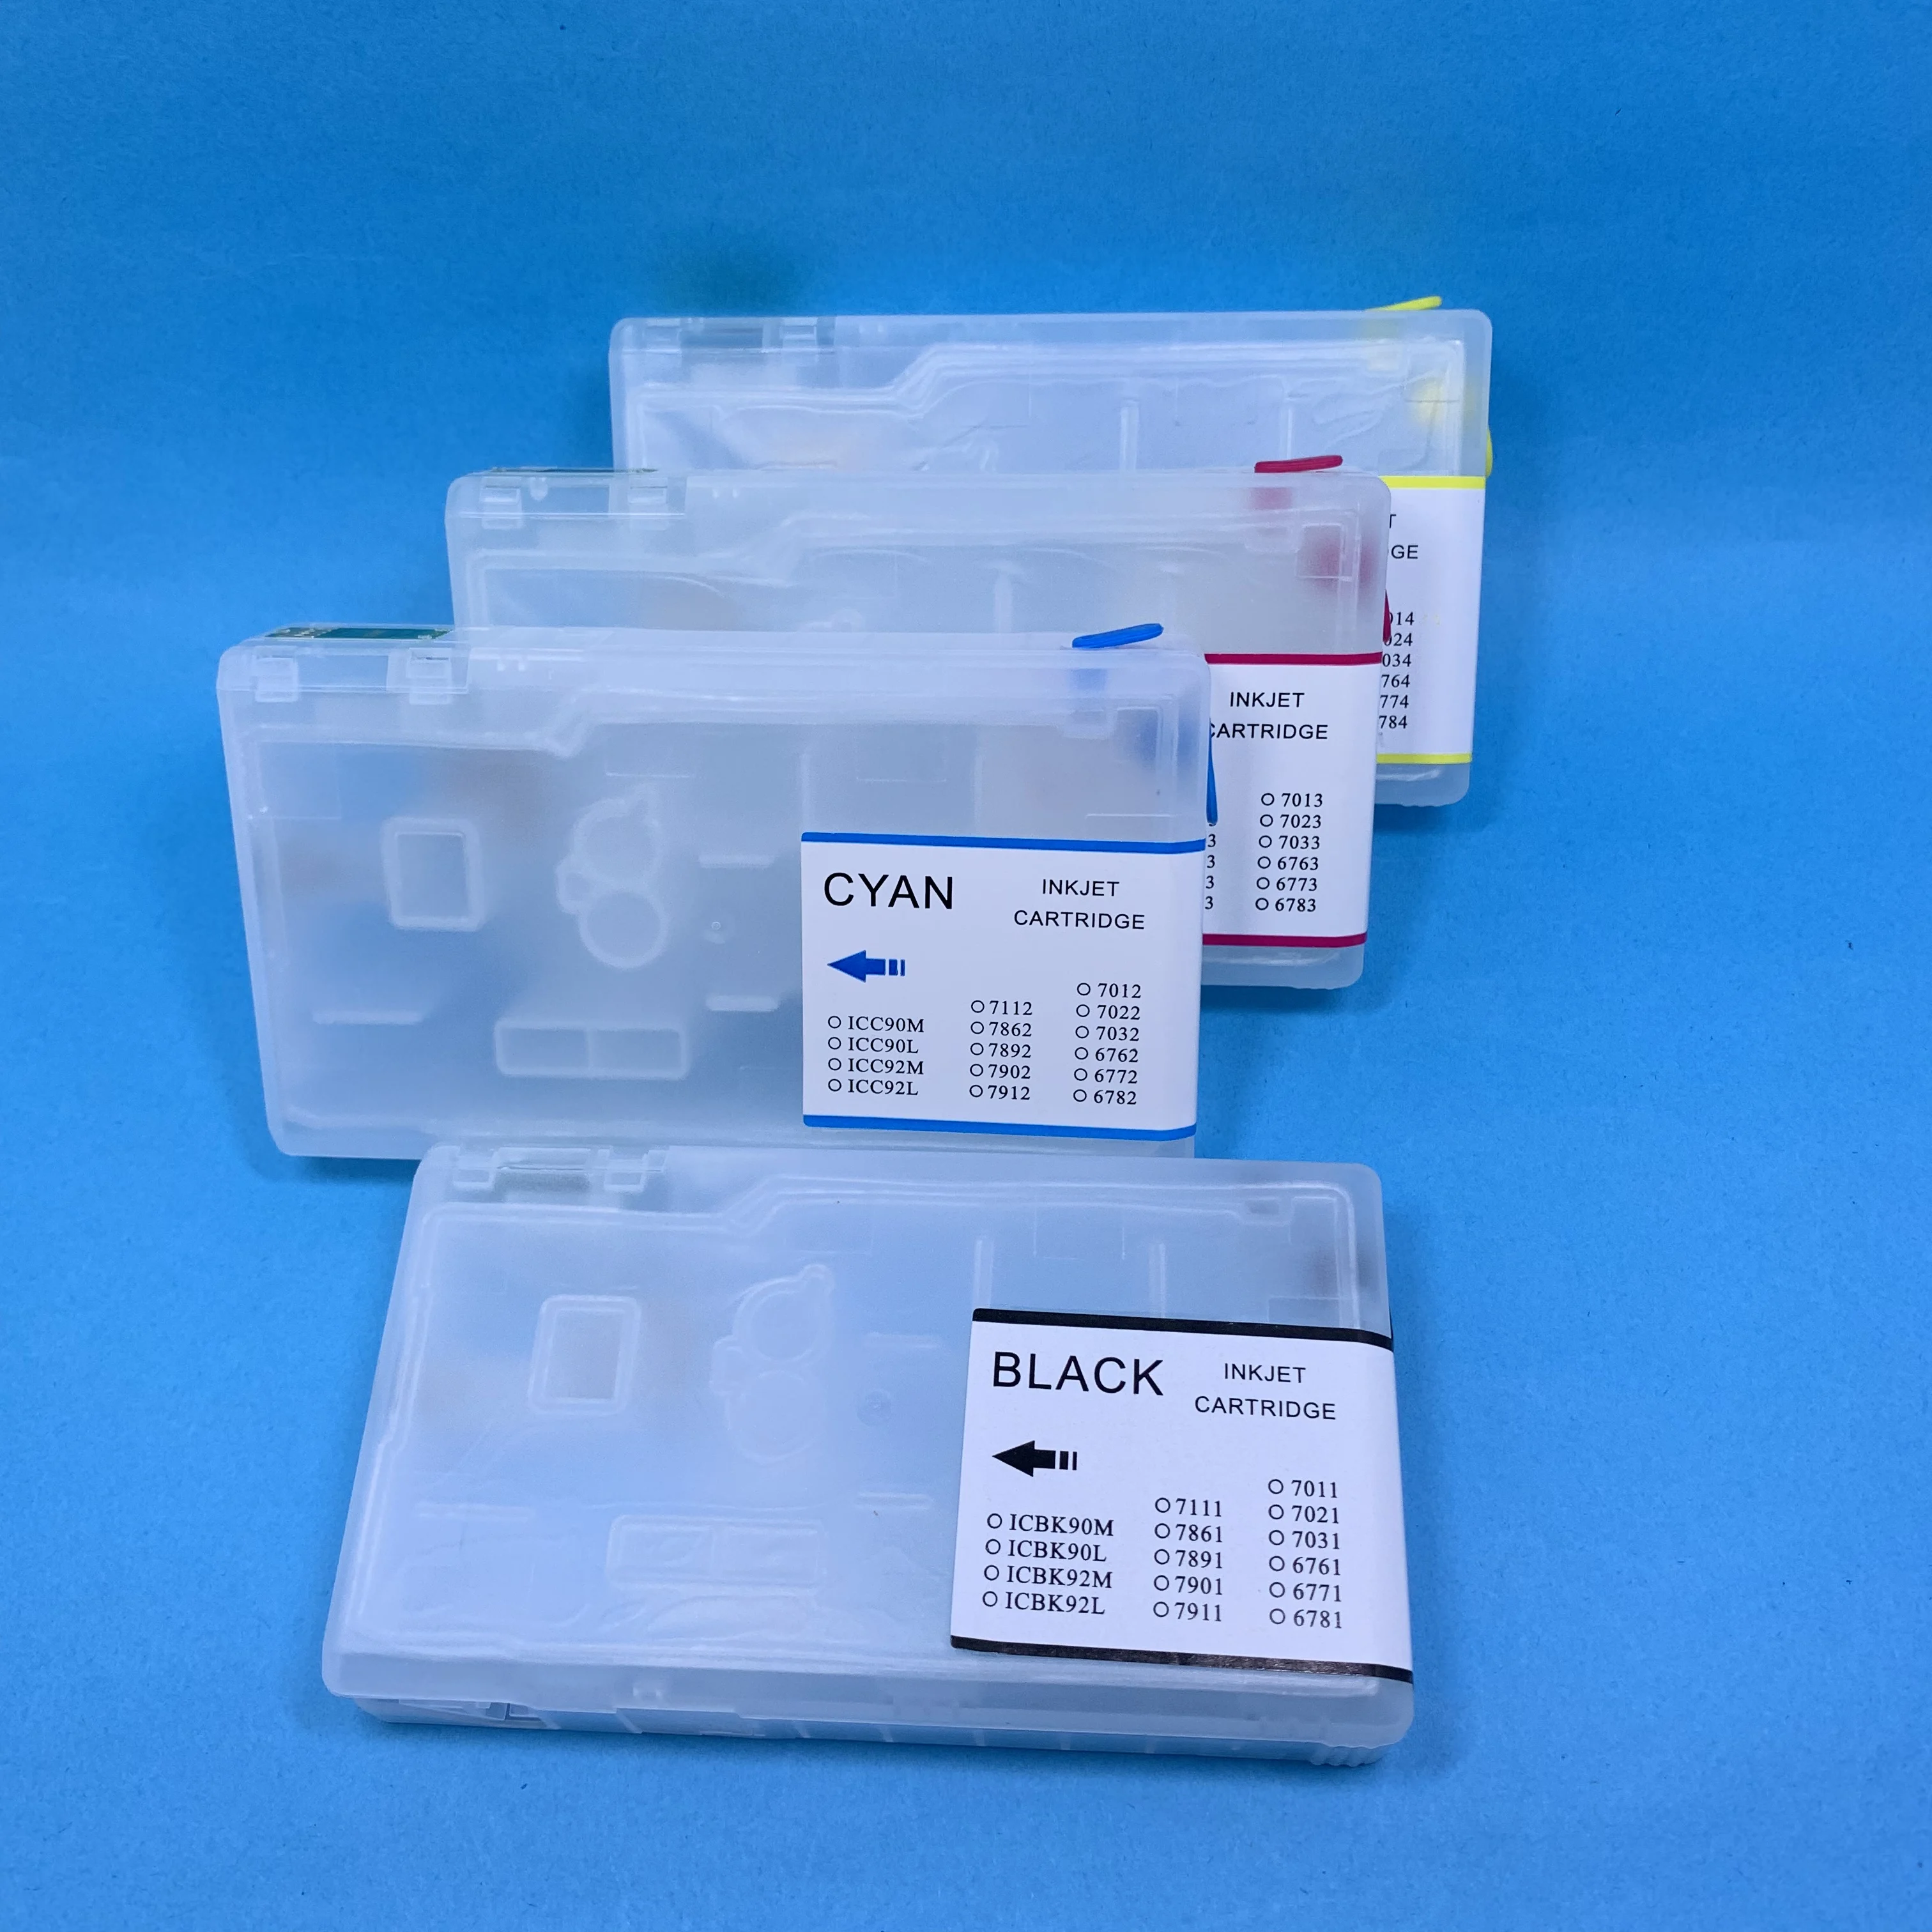 

YOTAT ICBK90 ICBK90M ICC90M ICM90M ICY90M / ICBK90L ICC90L ICM90L ICY90L Refillable Ink Cartridge for Epson PX-B700/PX-B750F